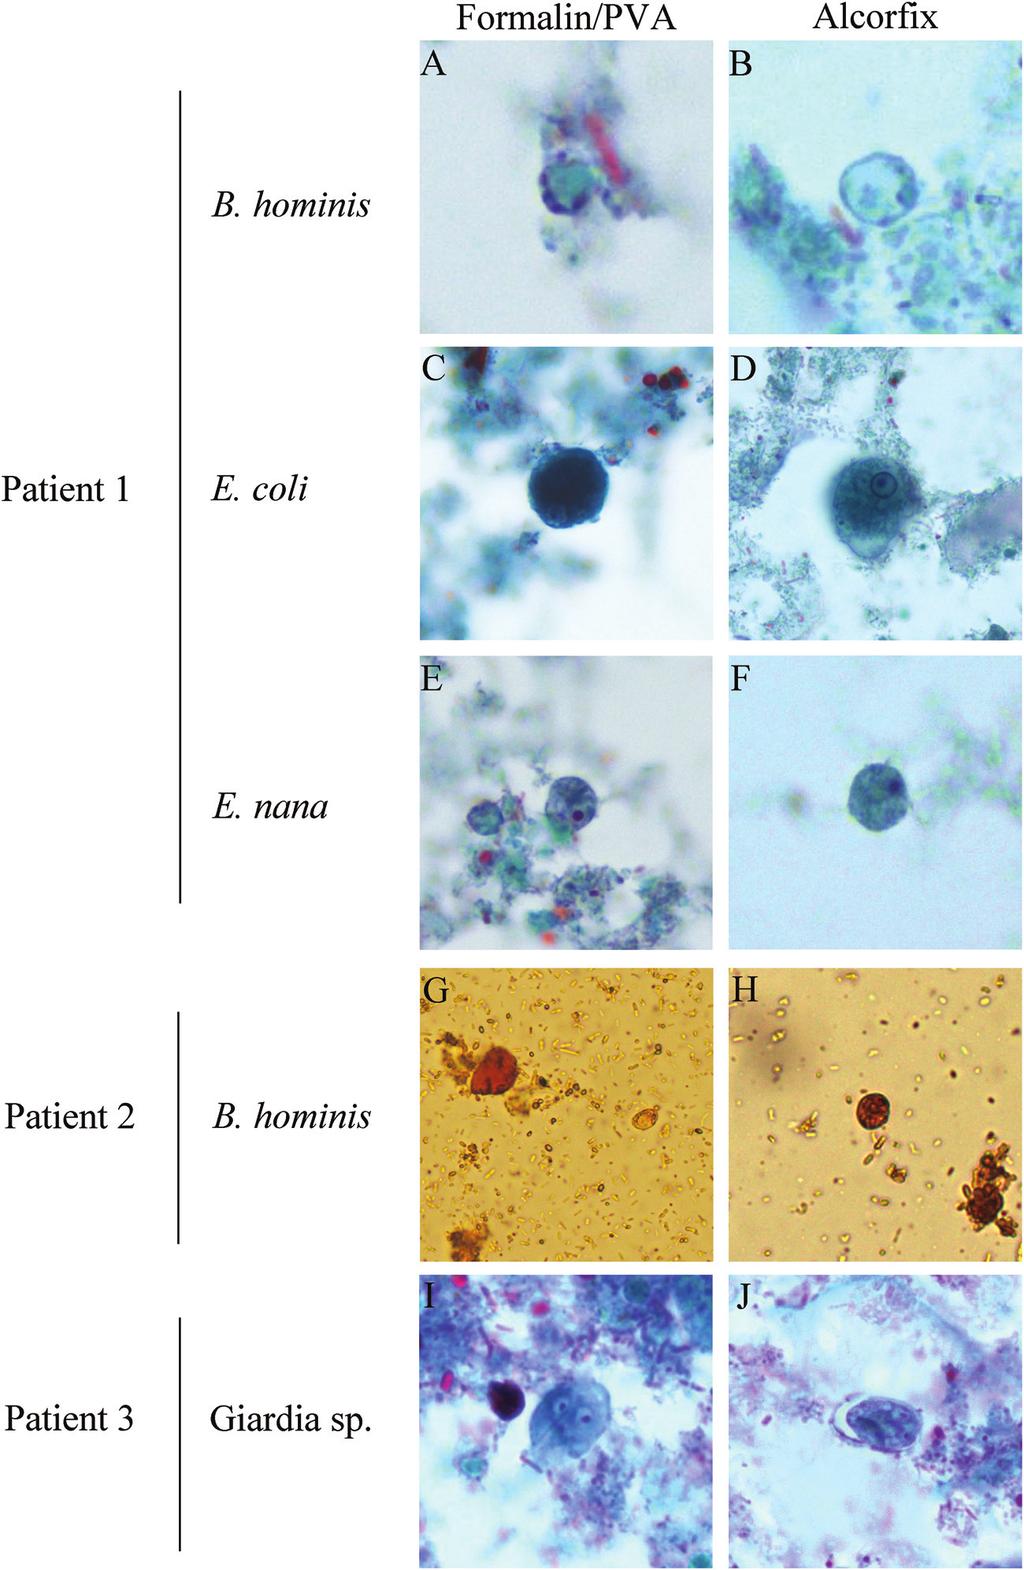 Couturier et al. Downloaded from http://jcm.asm.org/ FIG 2 Positive stool specimens cocollected in PVA-formalin and Alcorfix. Representative protozoa are shown for both fixative types.